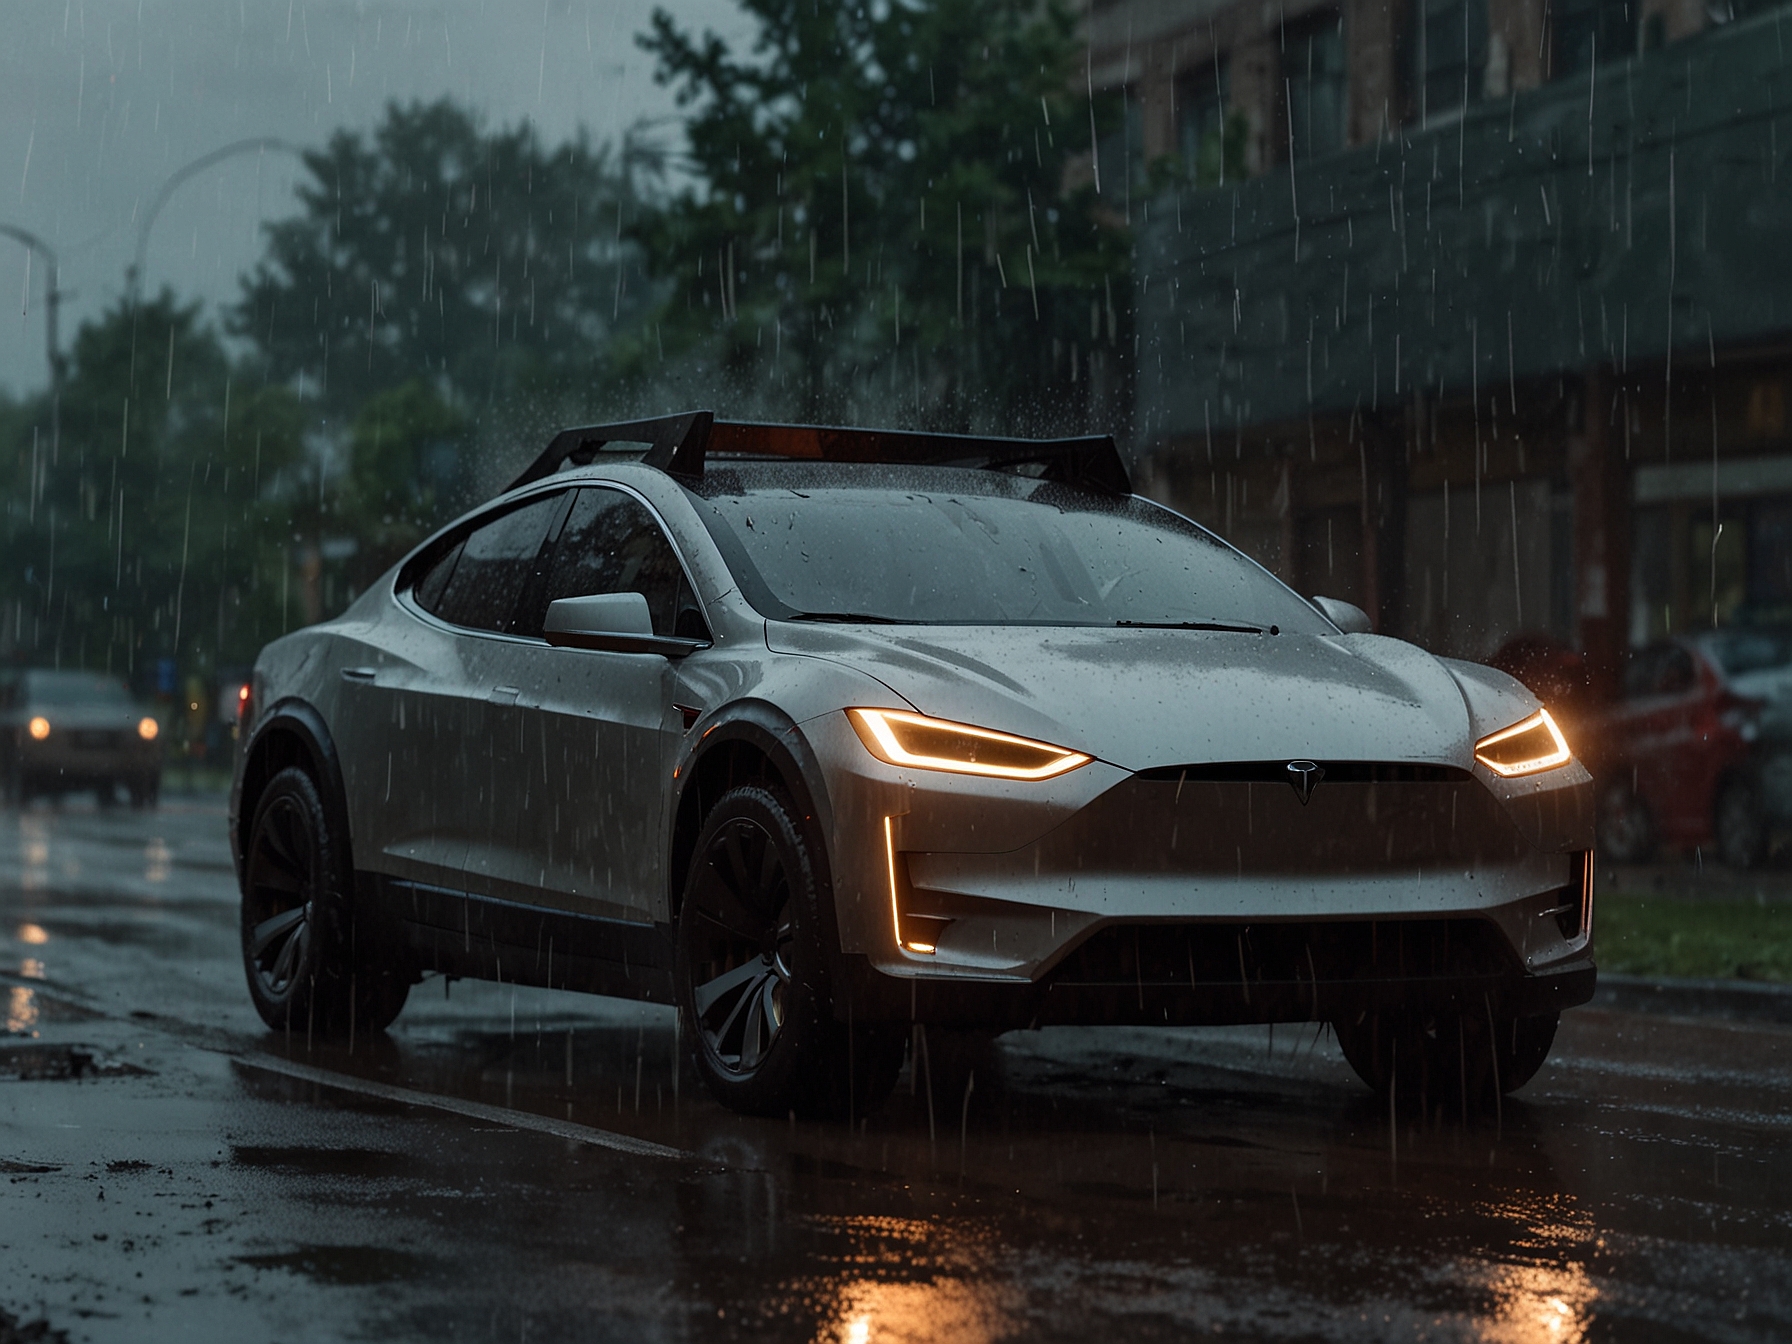 A close-up image of a Tesla Cybertruck in heavy rain, highlighting the oversized windshield wipers struggling to clear the large windshield, illustrating the issue discussed in the article.